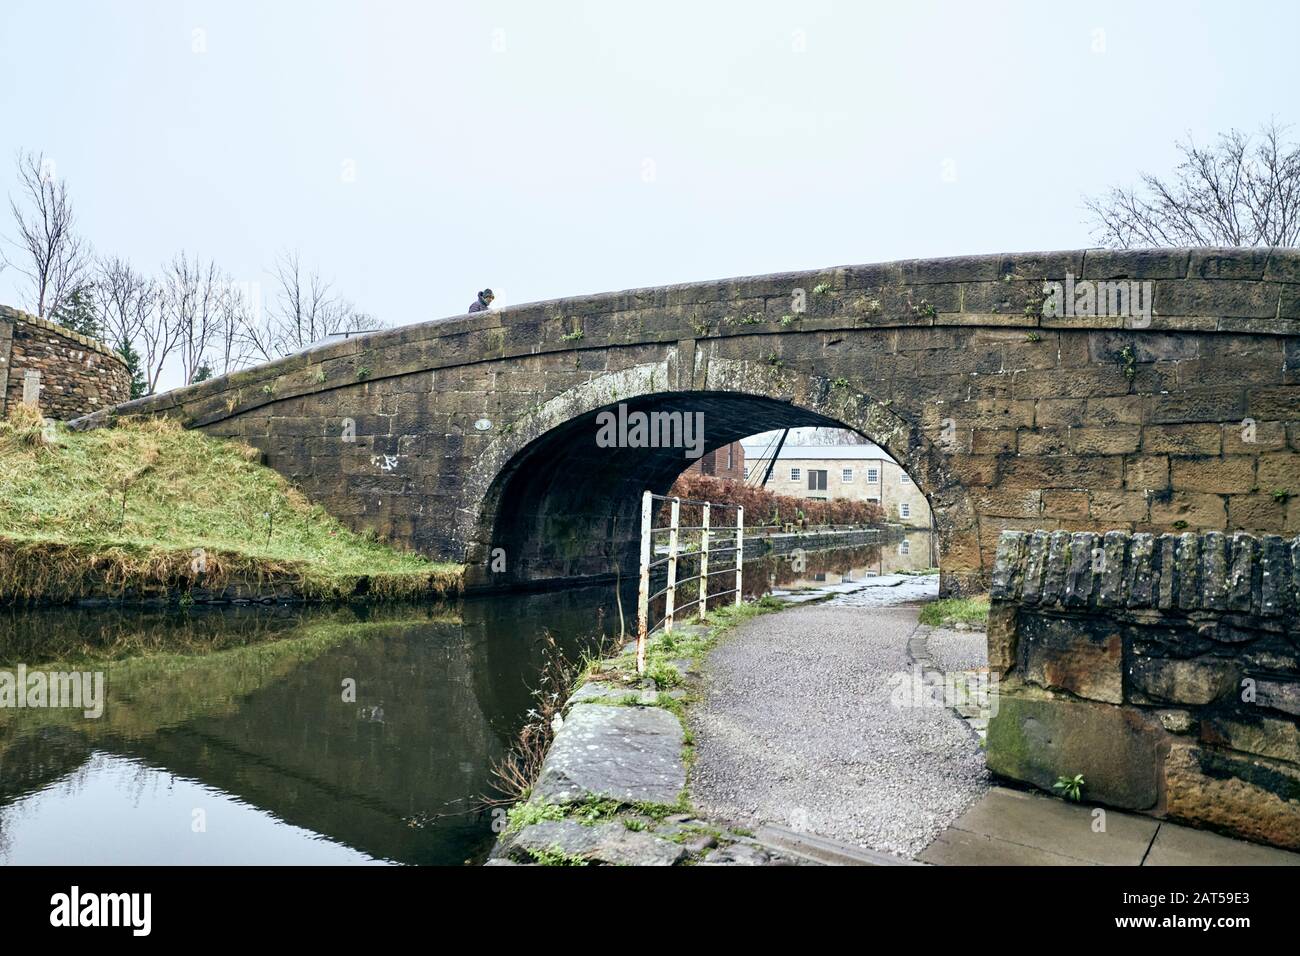 Bridge number 98 on the Lancaster canal in winter Stock Photo